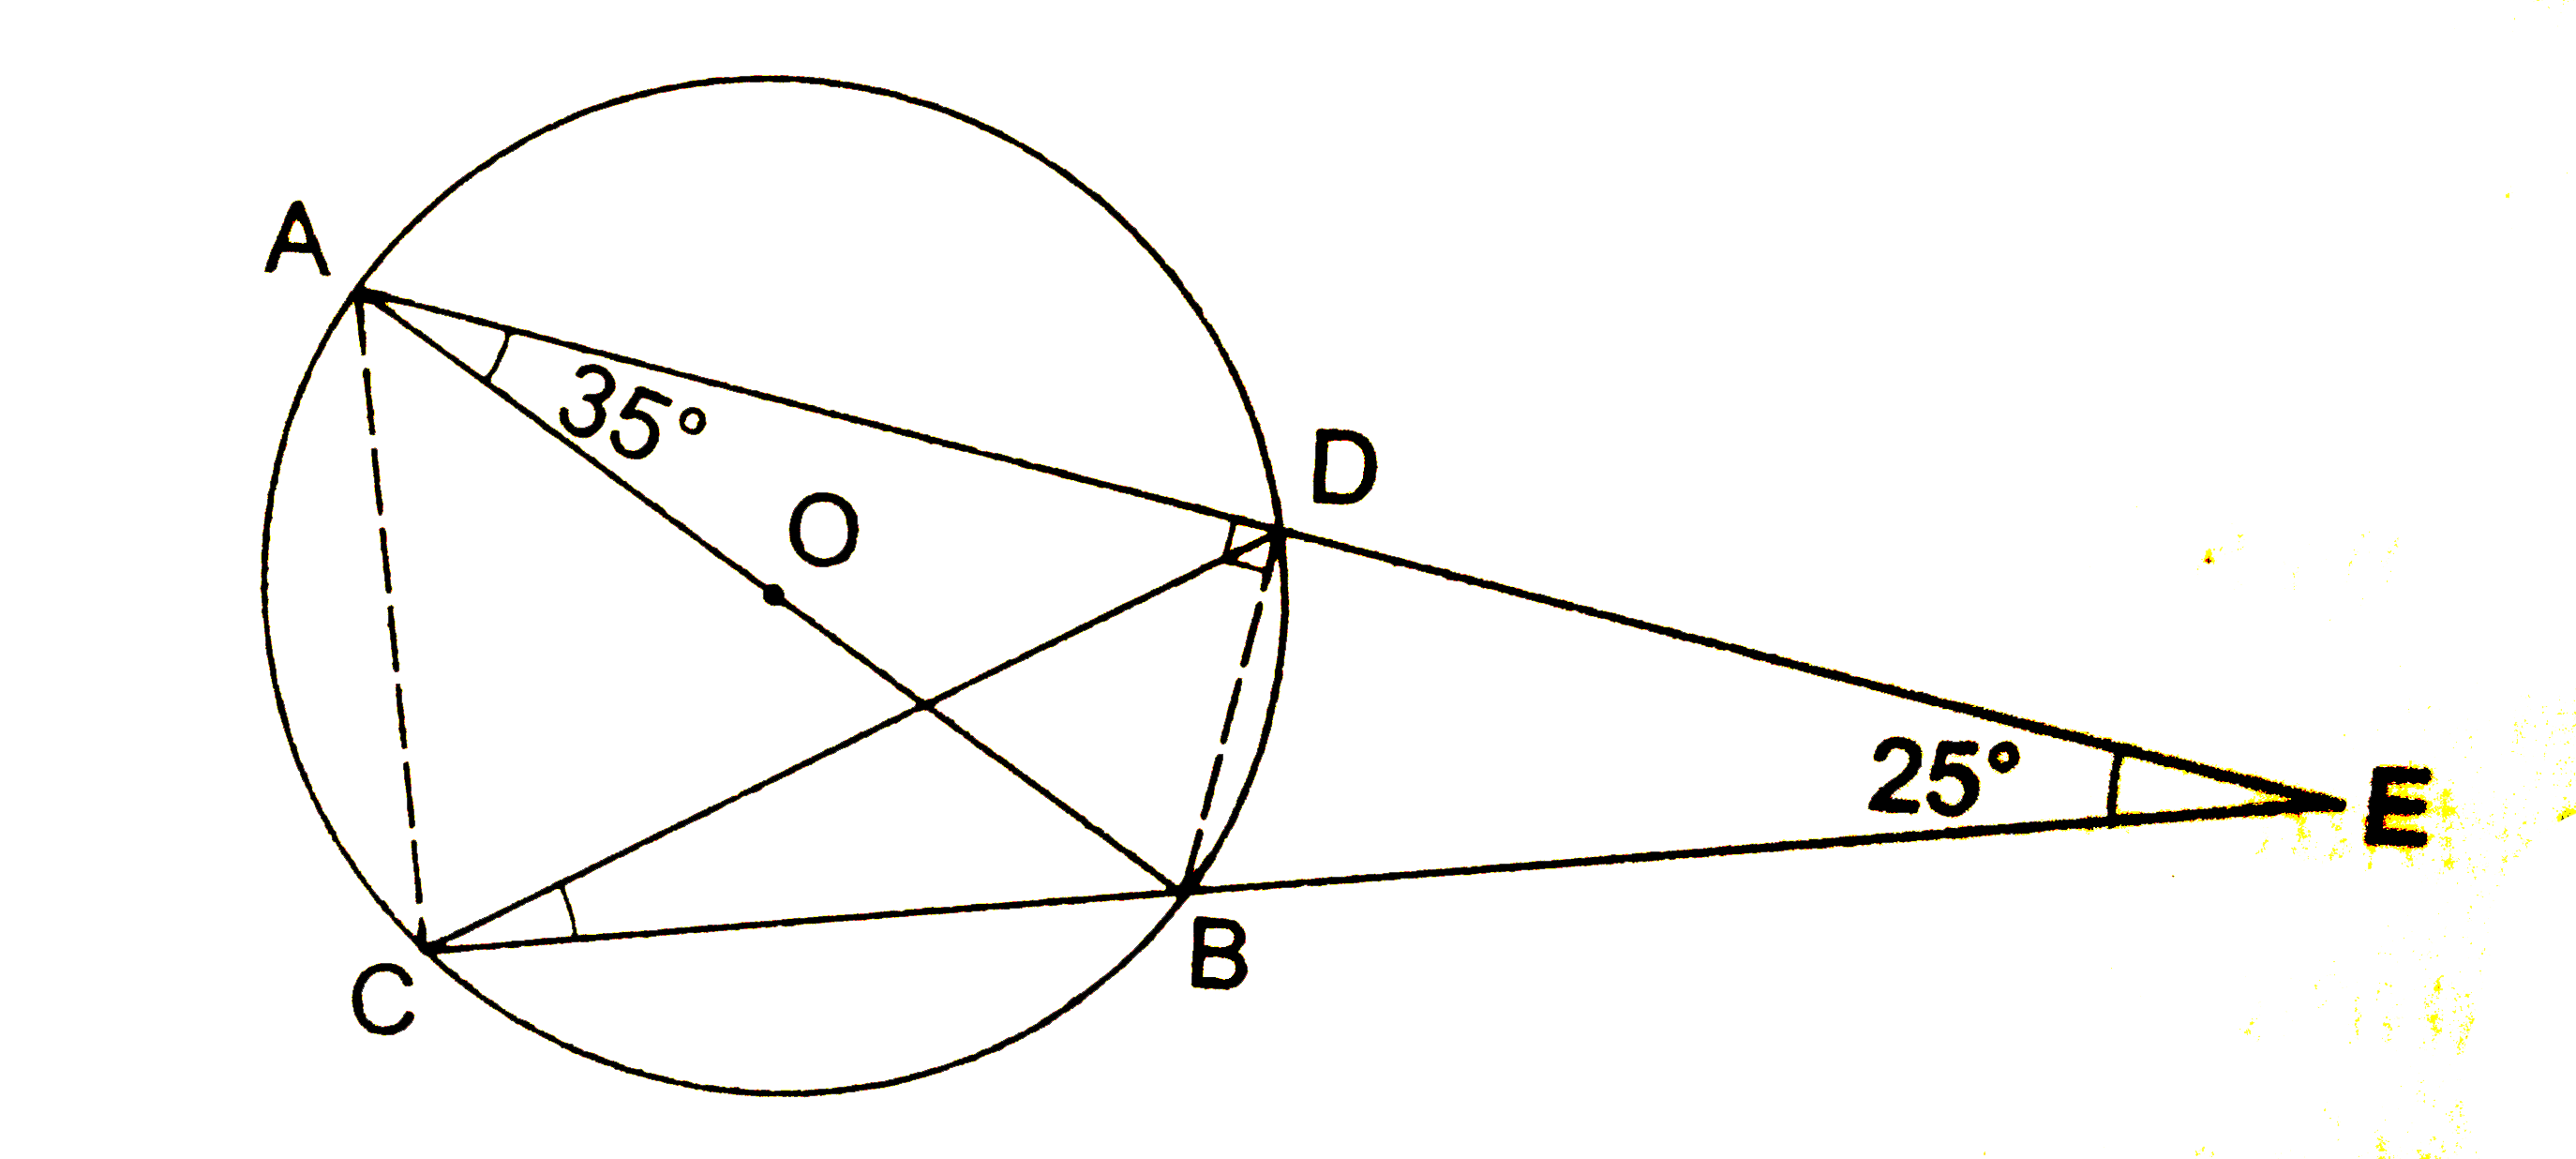 In the given figure, AB is a diameter of a circle with centre O. If  ADE and CBE are straight lines, meeting at E such that / BAD = 35^(@) and / BED = 25^(@)  , find (i) /DBC , (ii) / BCD and (ii) / CDB.